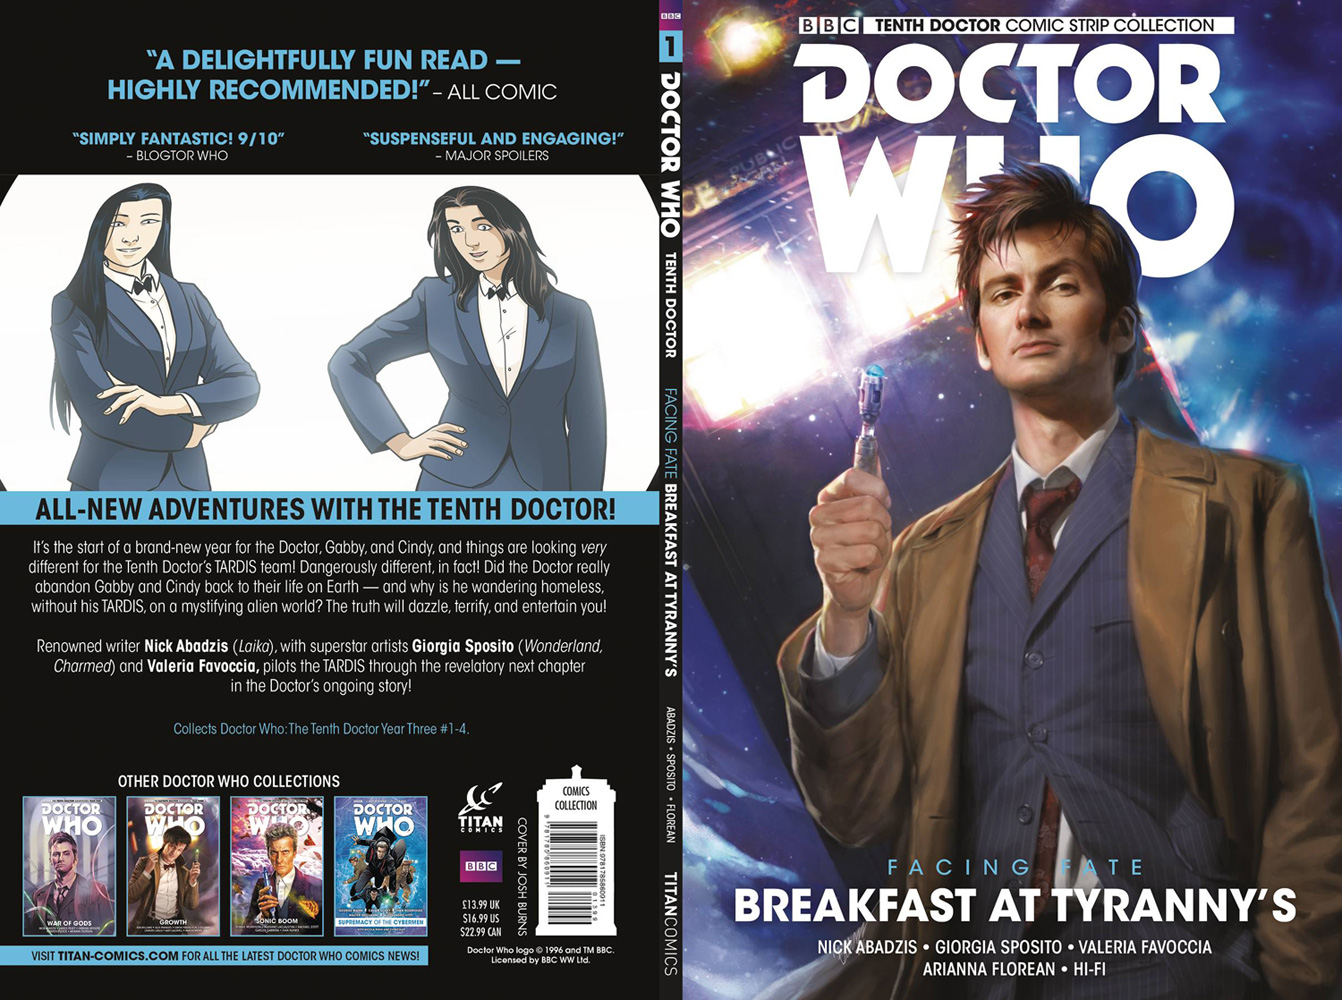 Image: Doctor Who: The 10th Doctor Facing Fate Vol. 01: Breakfast at Tyranny's SC  - Titan Comics